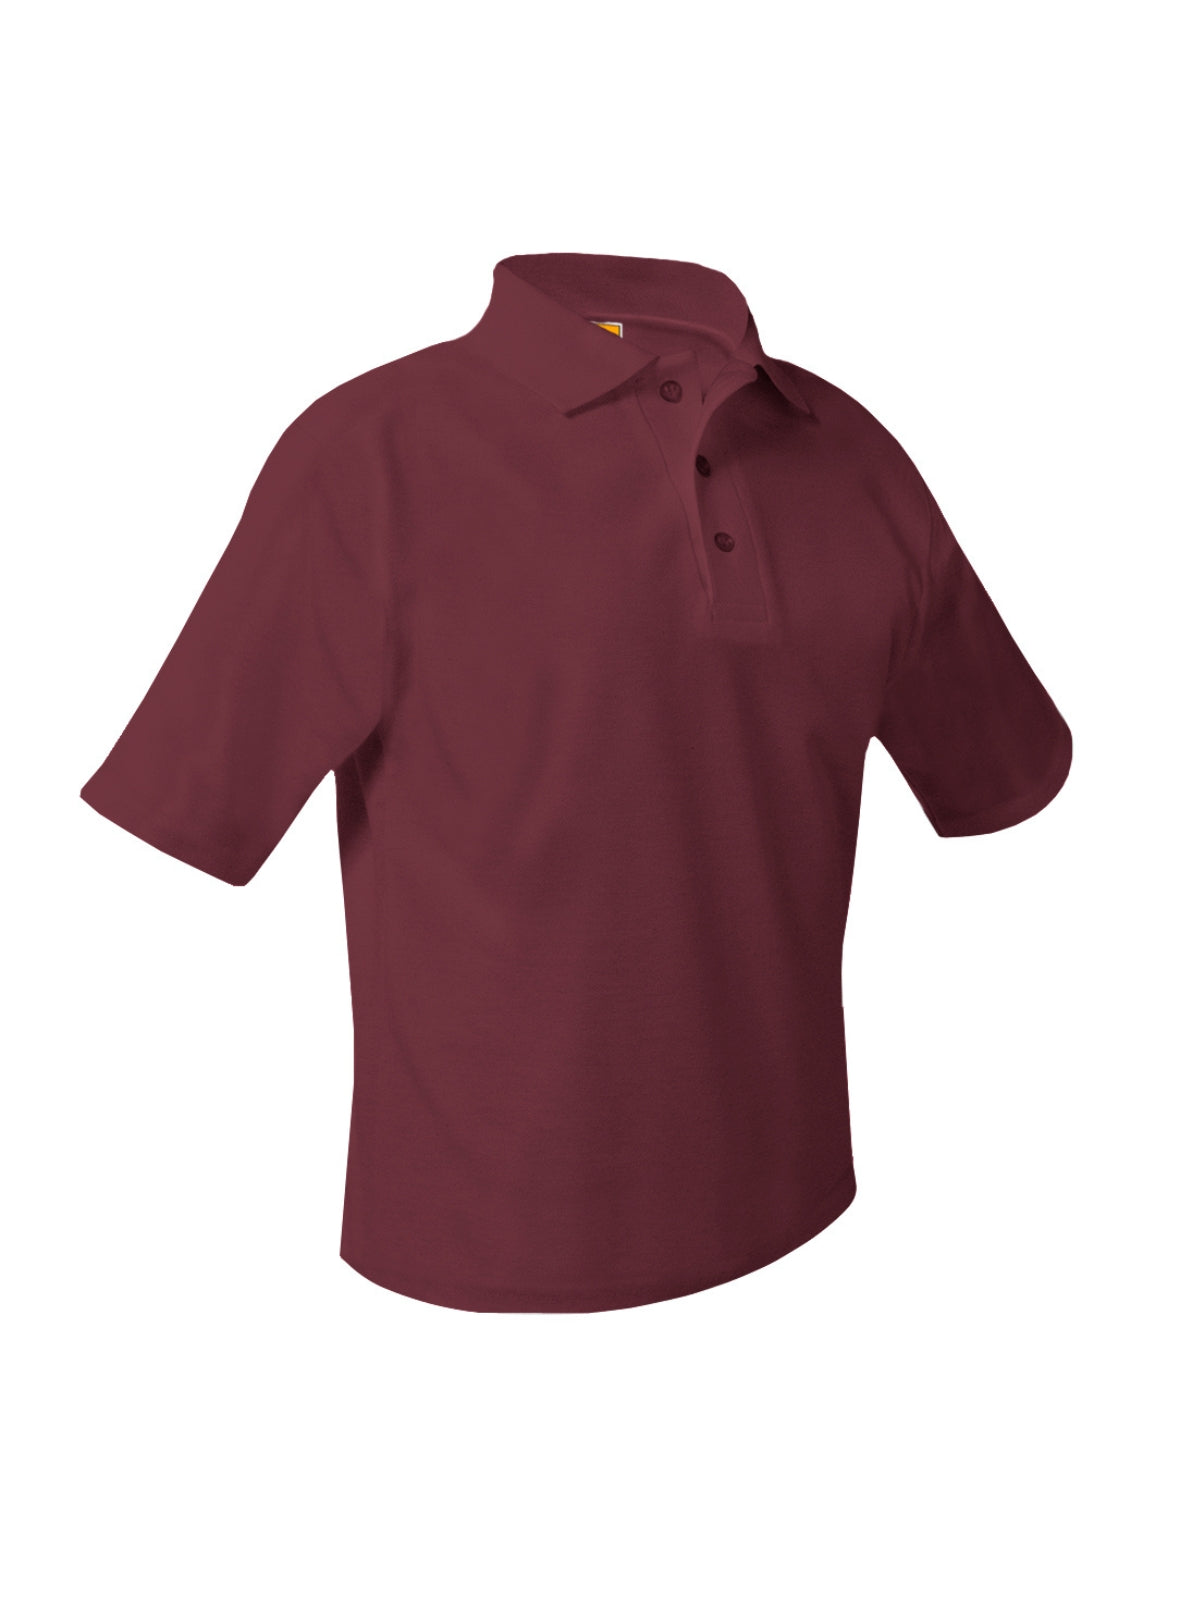 Unisex Adults and Kids Polo - 8760 - Wine